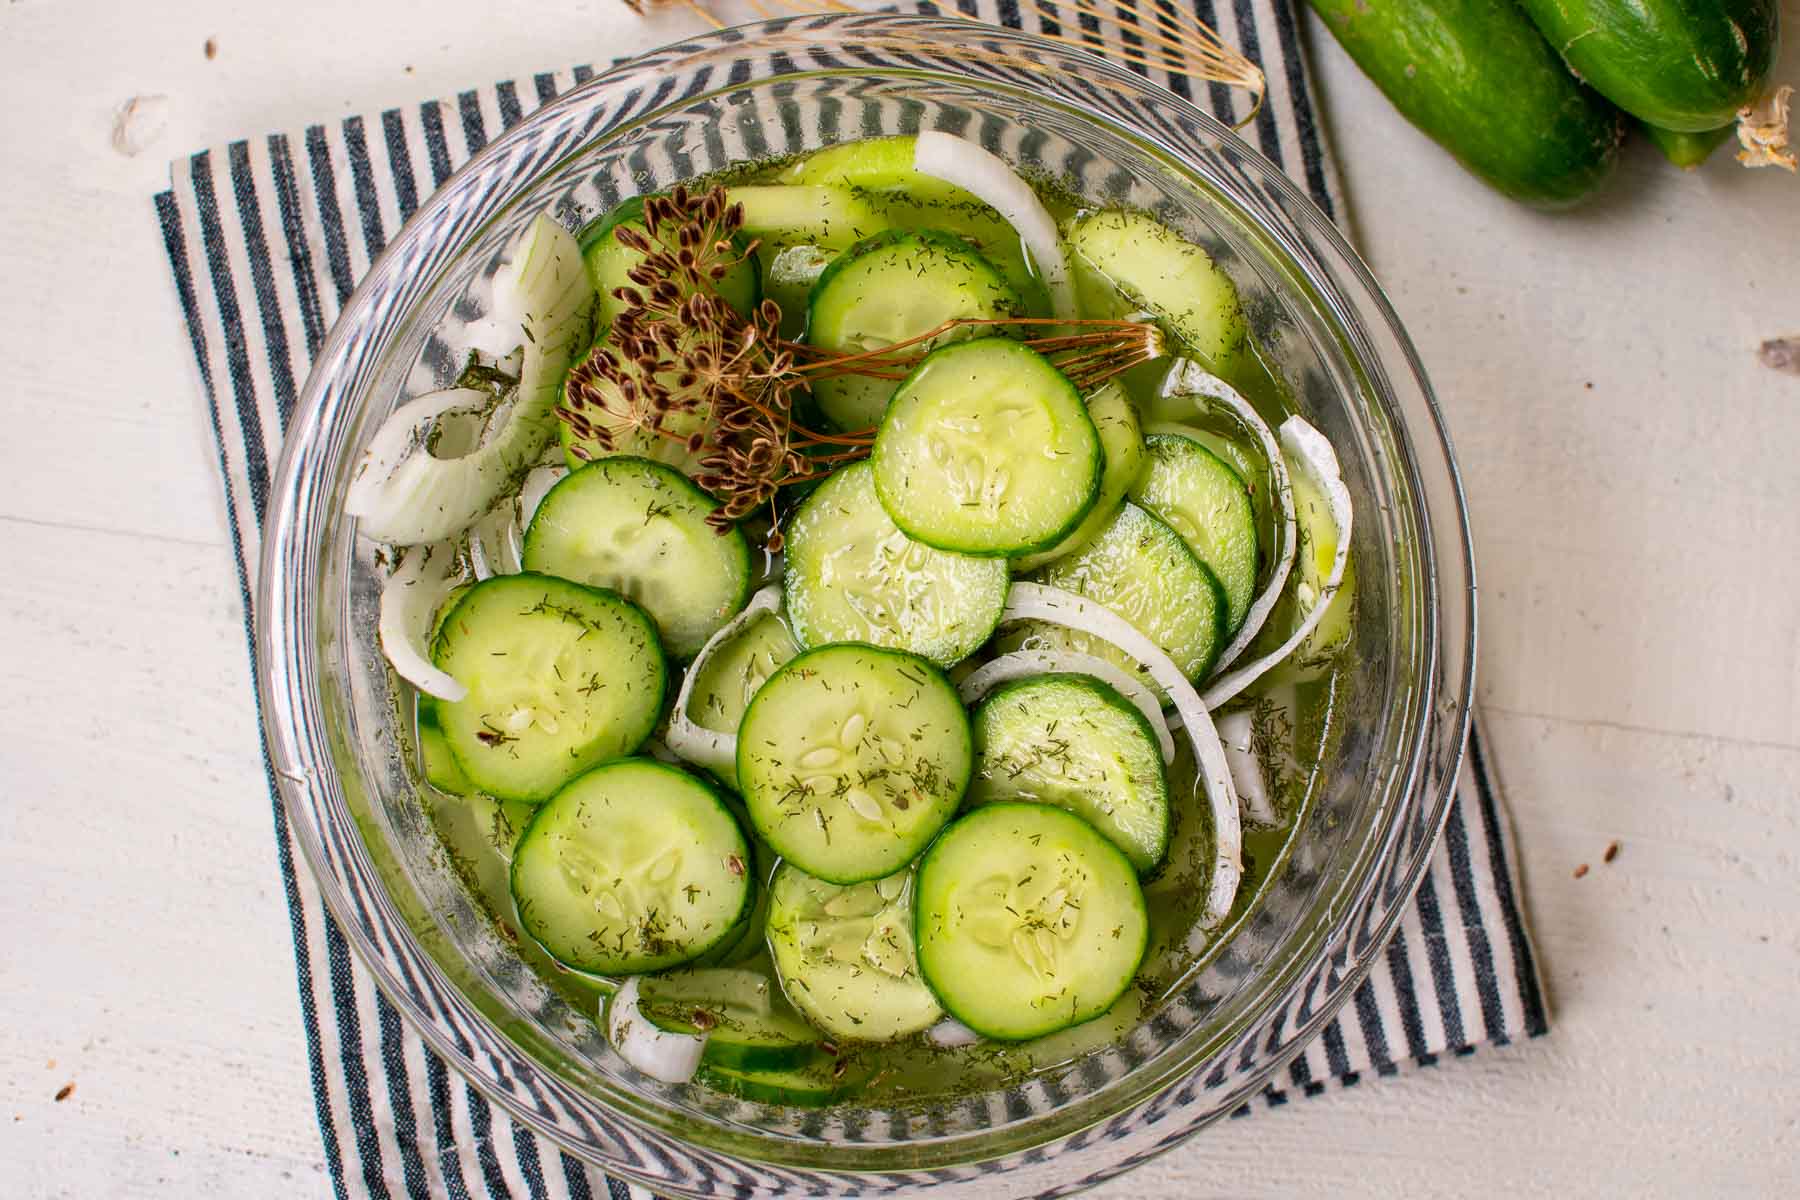 Sliced cucumbers in a glass bowl with veggies on a striped napkin.